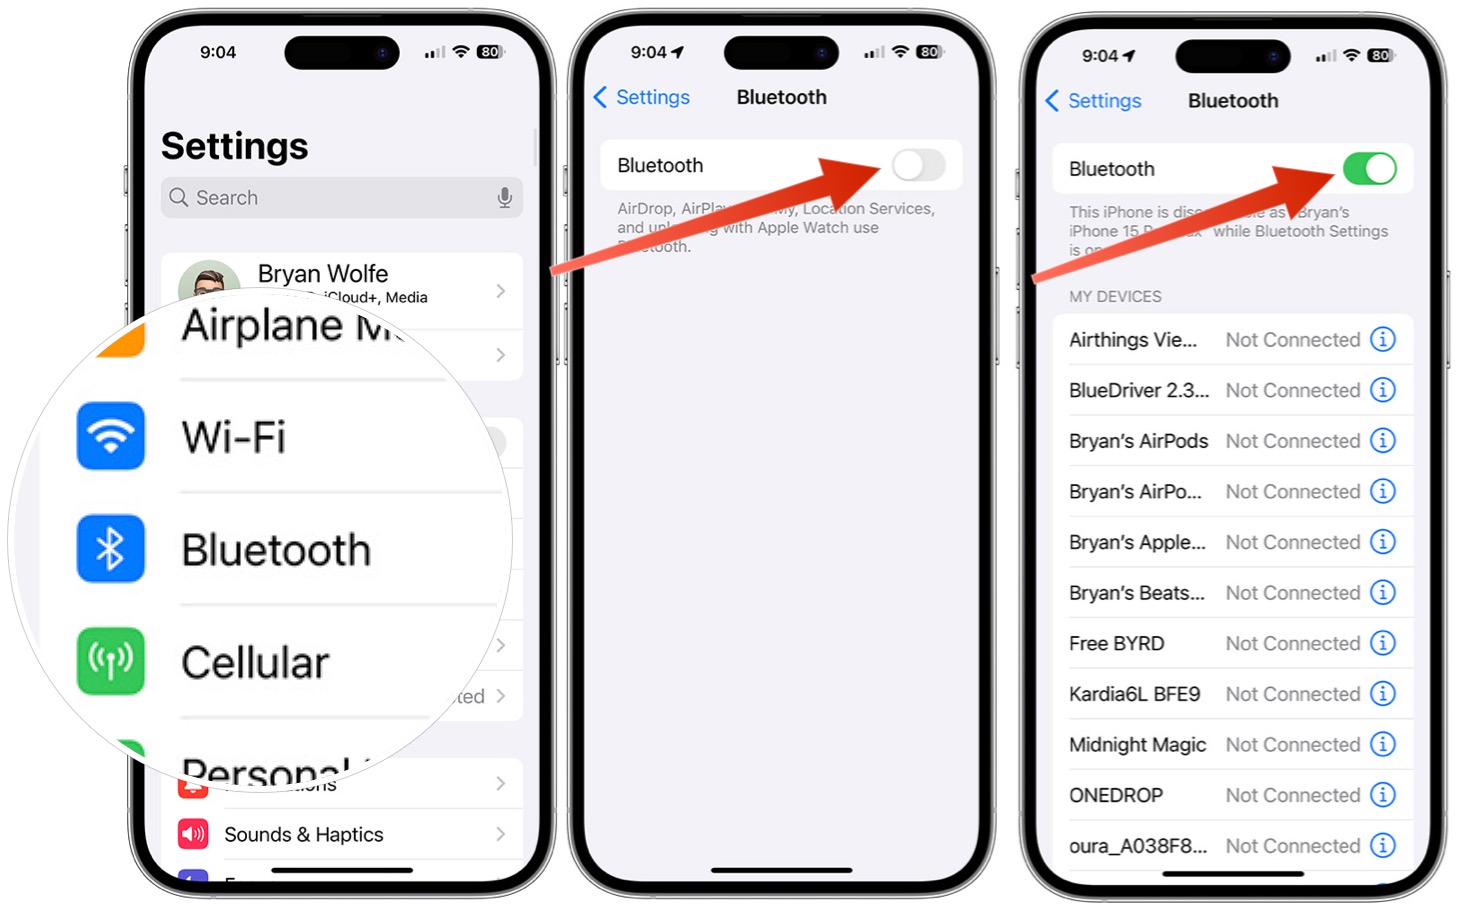 Screenshots showing how to turn Bluetooth on/off on iPhone.